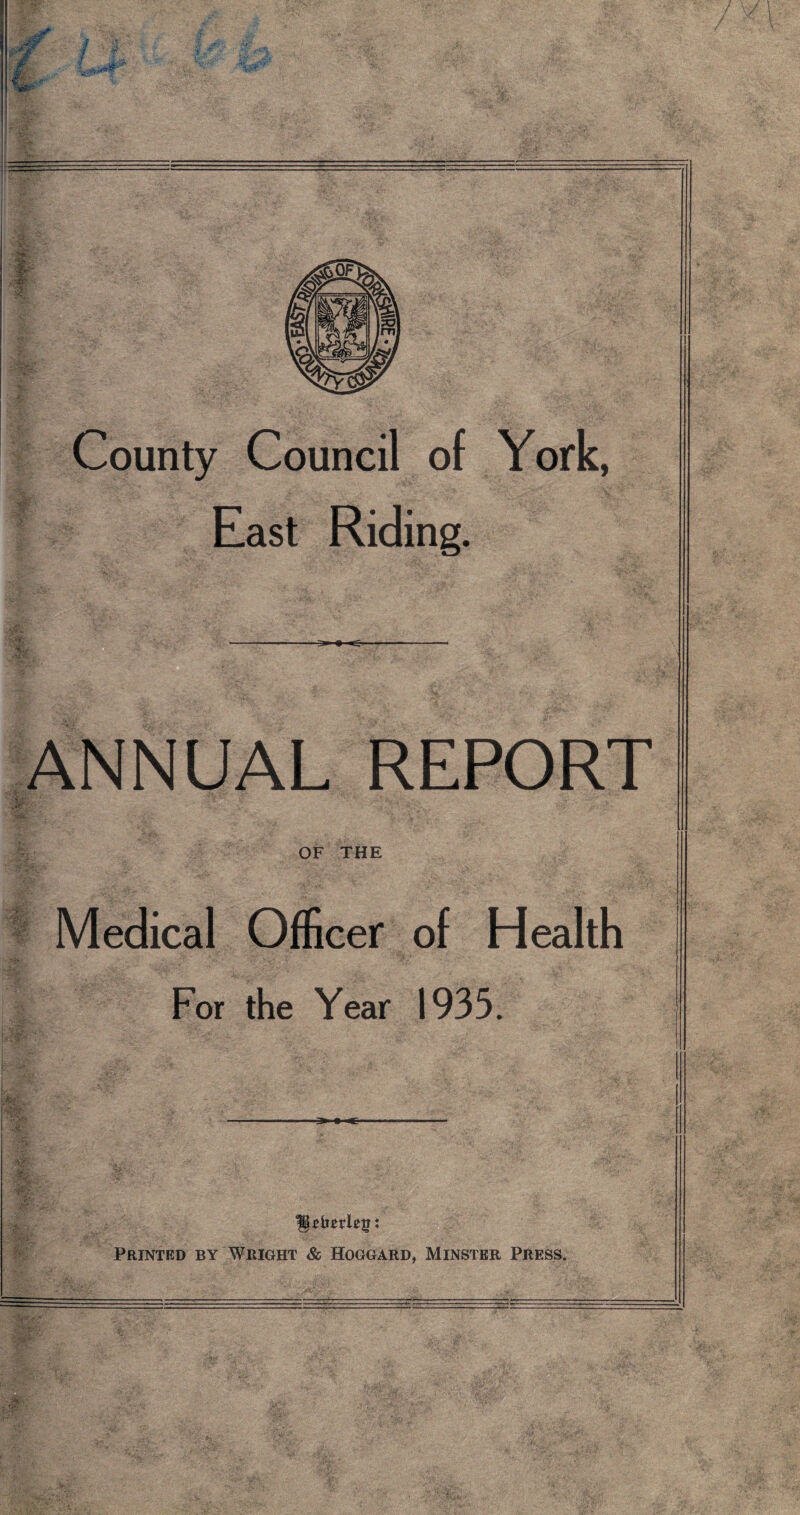 .Jr :/ La**#* .-*r County Council of York, East Riding. ^L >■# < ANNUAL REPORT OF THE Medical Officer of Health For the Year 1935. M Printed by Wright & Hoggard, Minster Press.